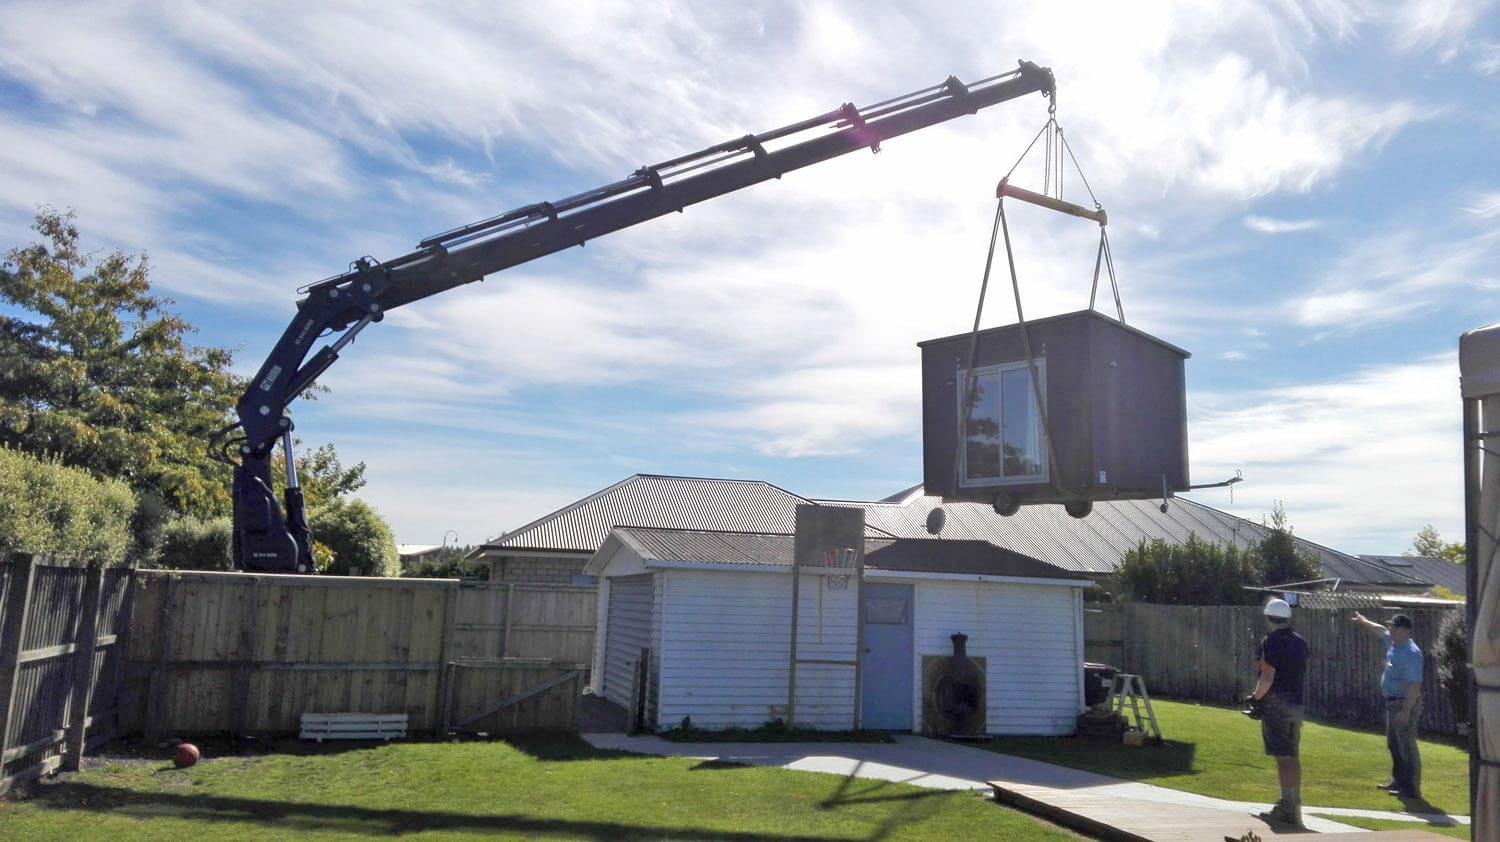 A crane lifting a portable cabin over a house into the back yard